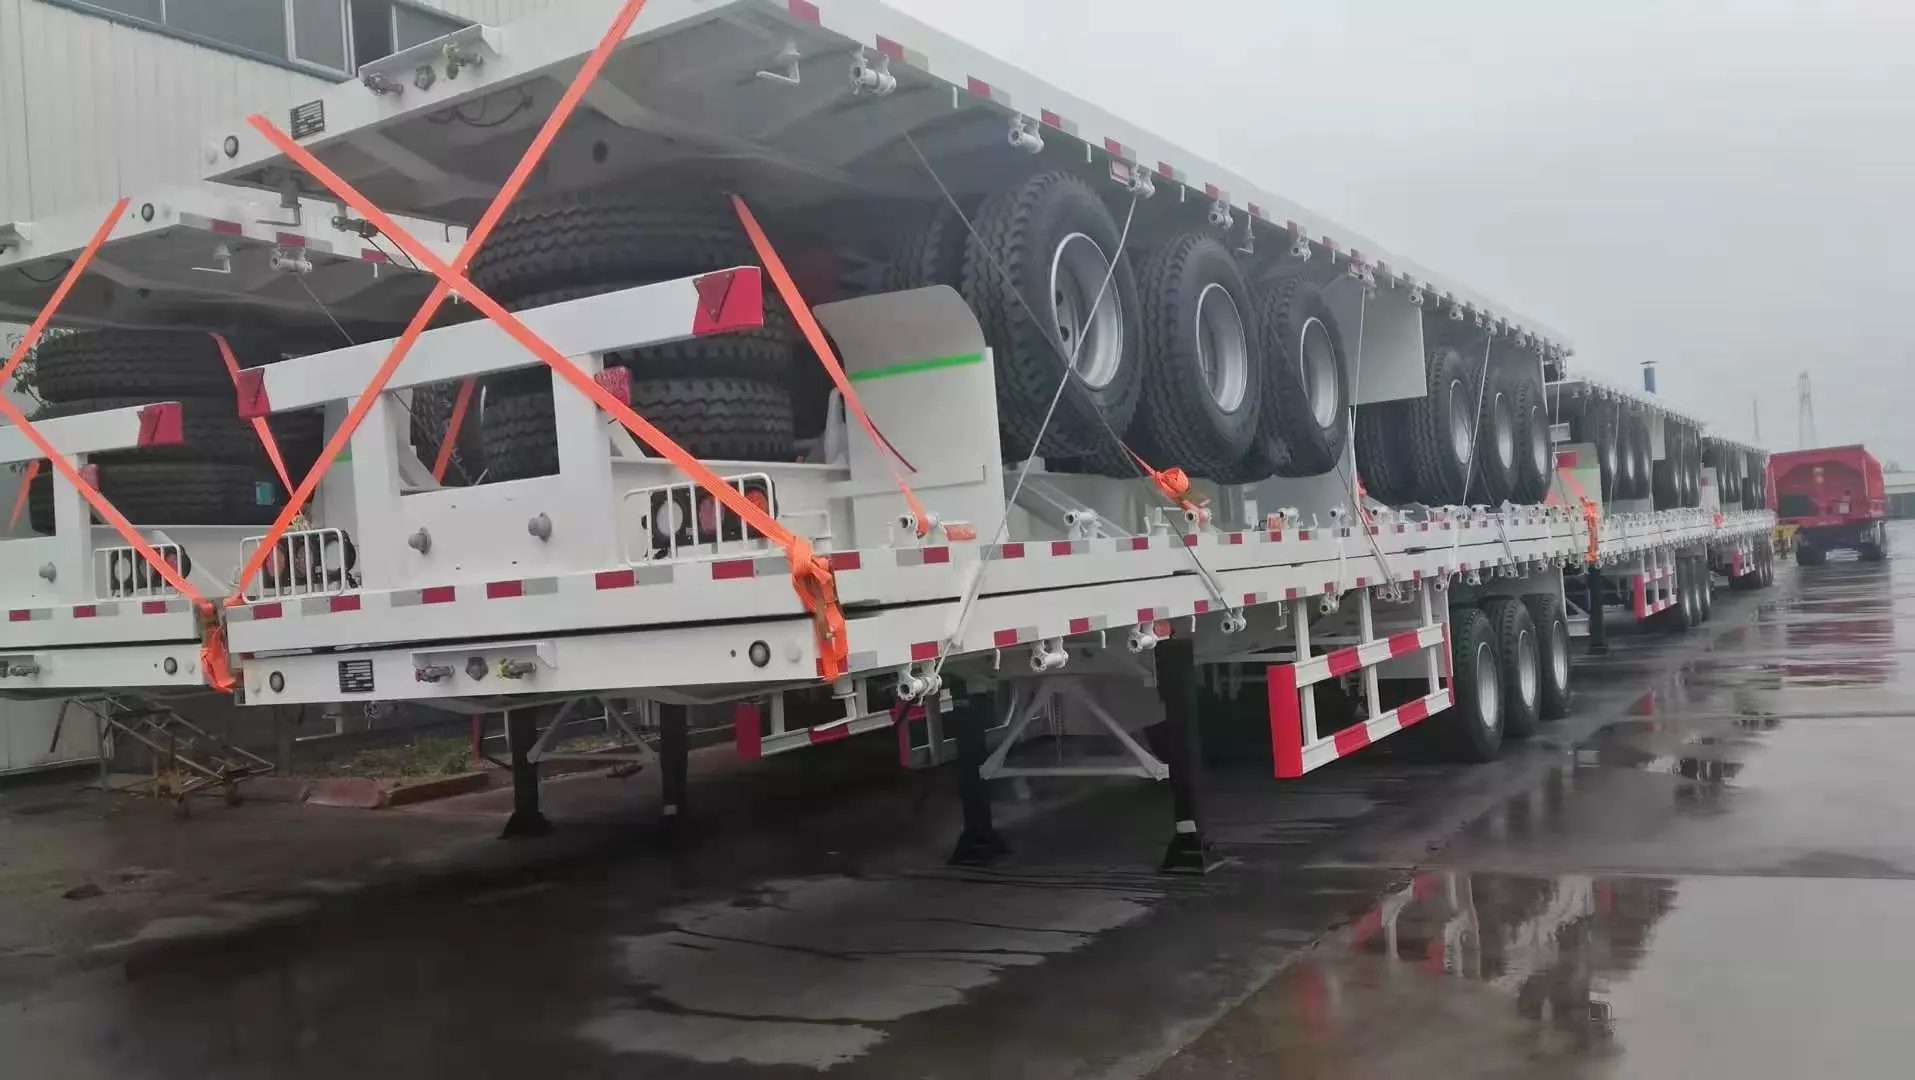 Flatbed Trailers Ready to Be Shipped